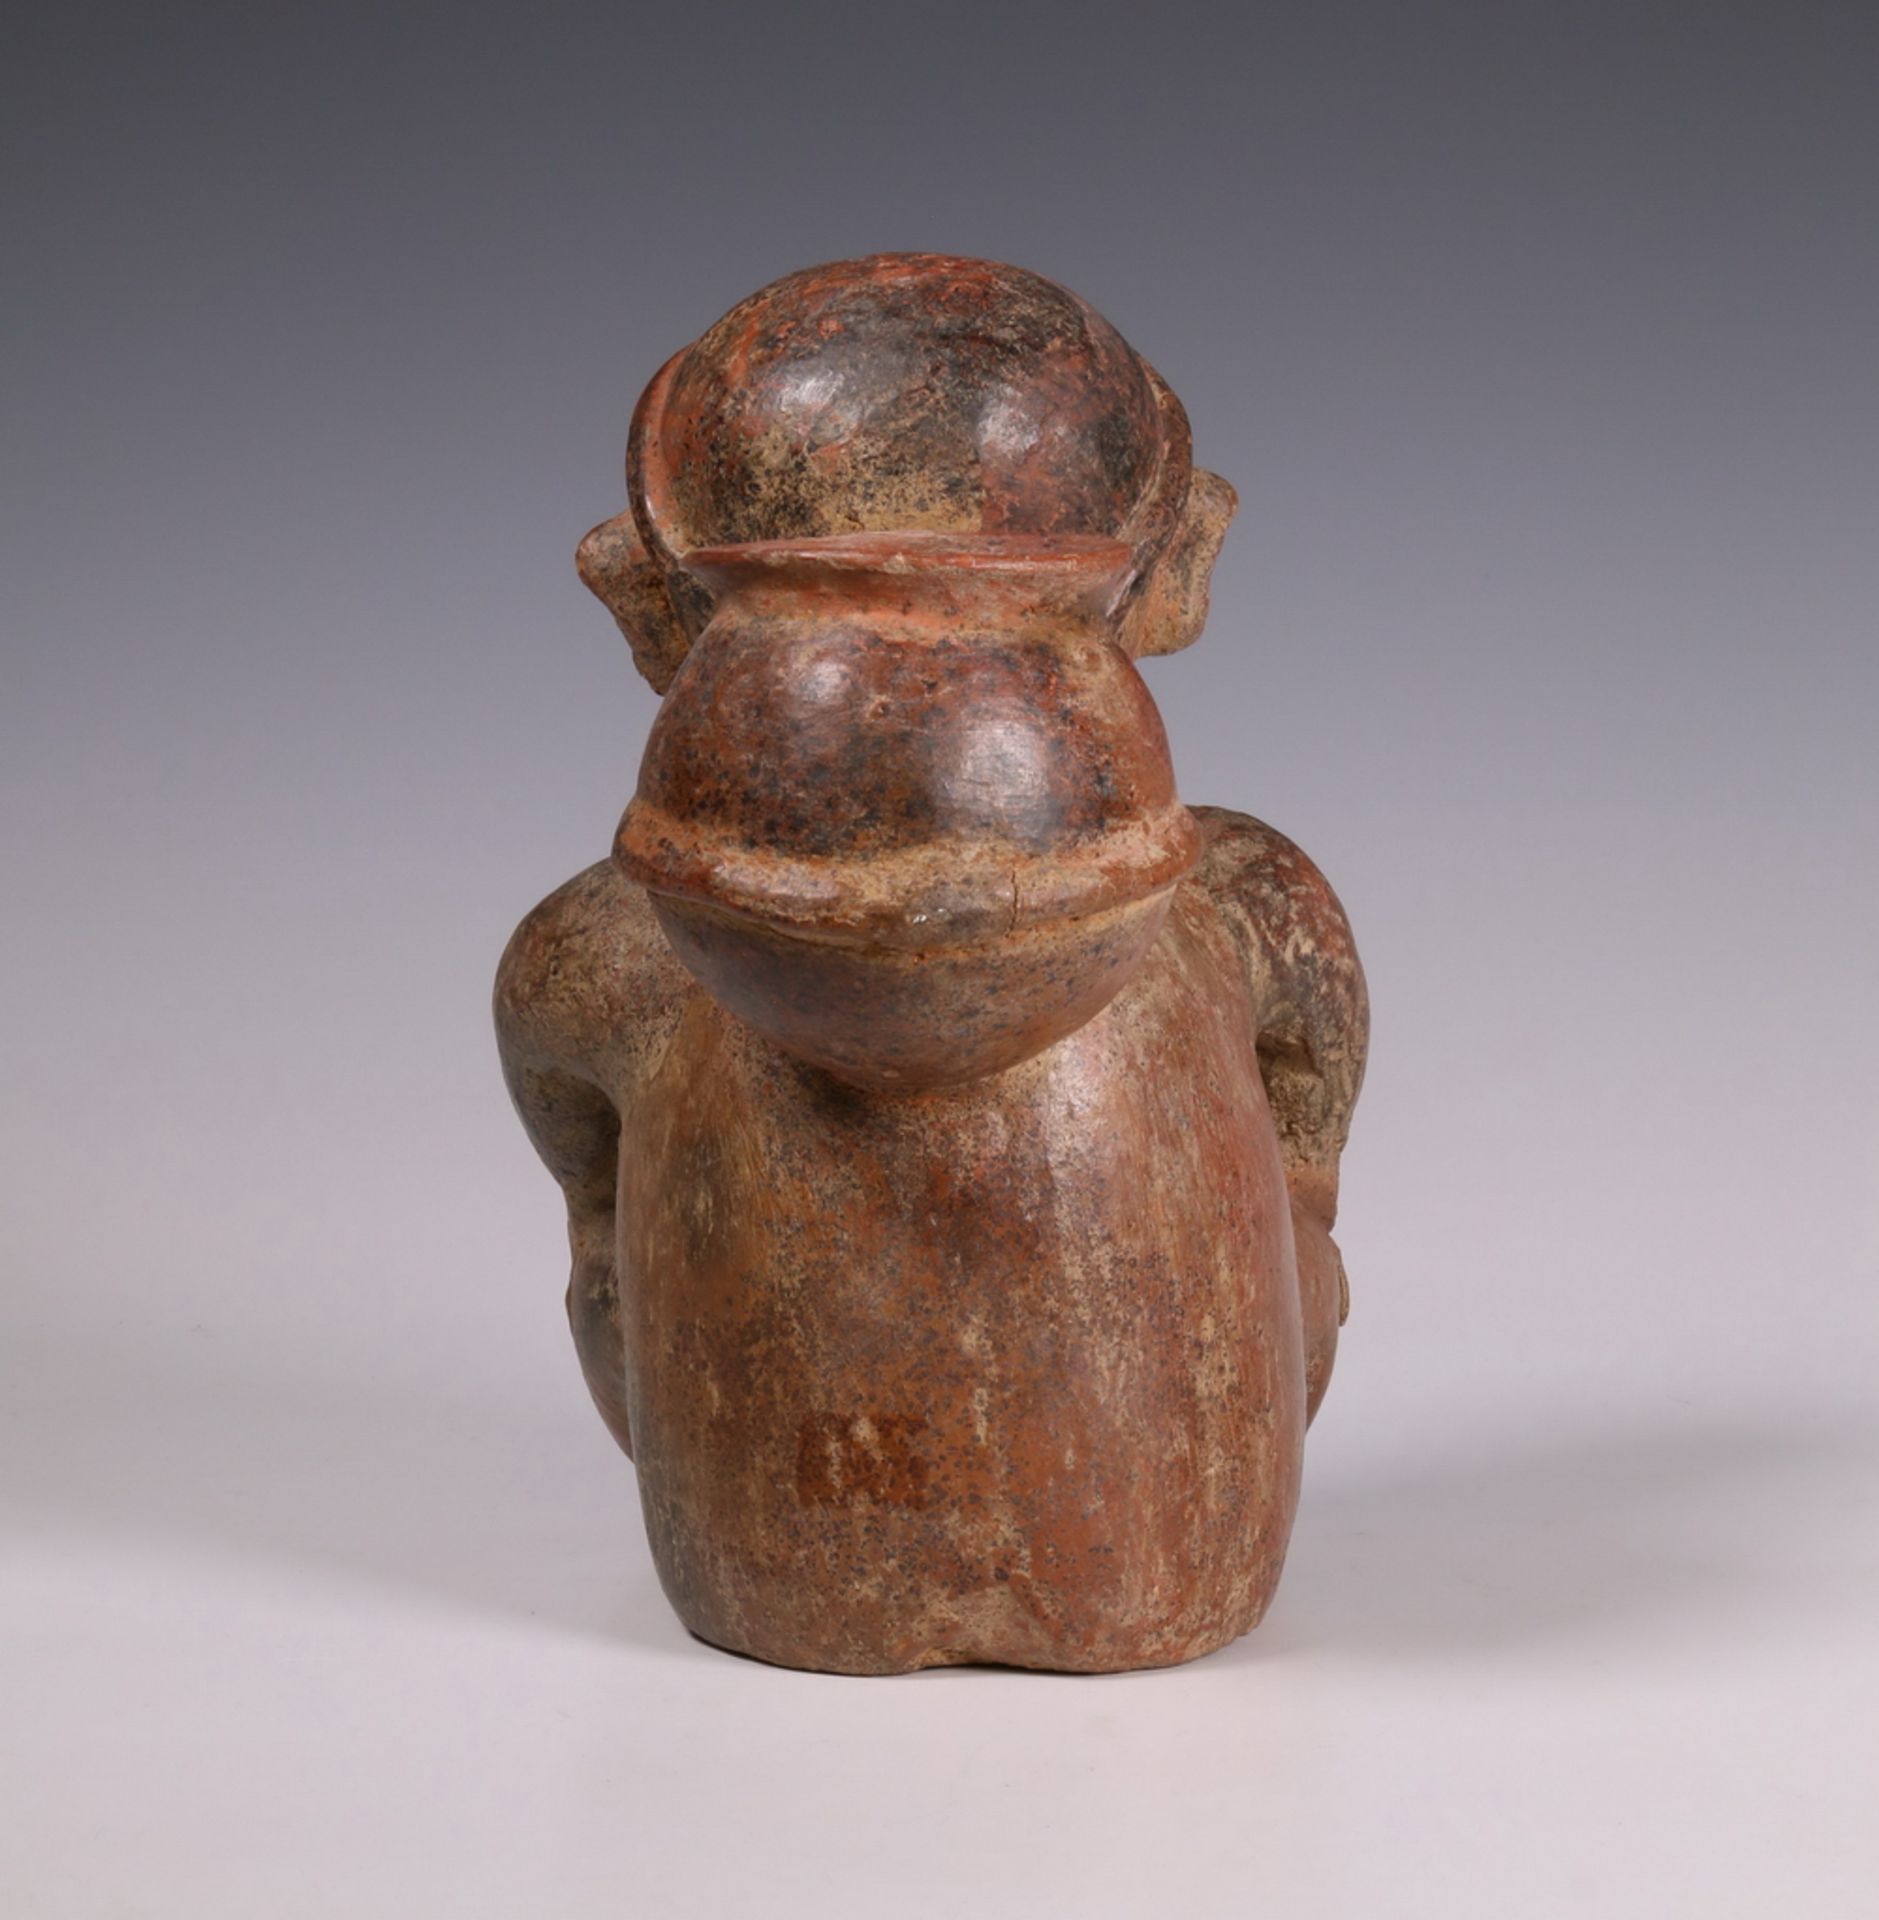 Mexico, Colima, a red earthenware sculpture of a seated figure, 100 BC-250 AD, - Image 5 of 5